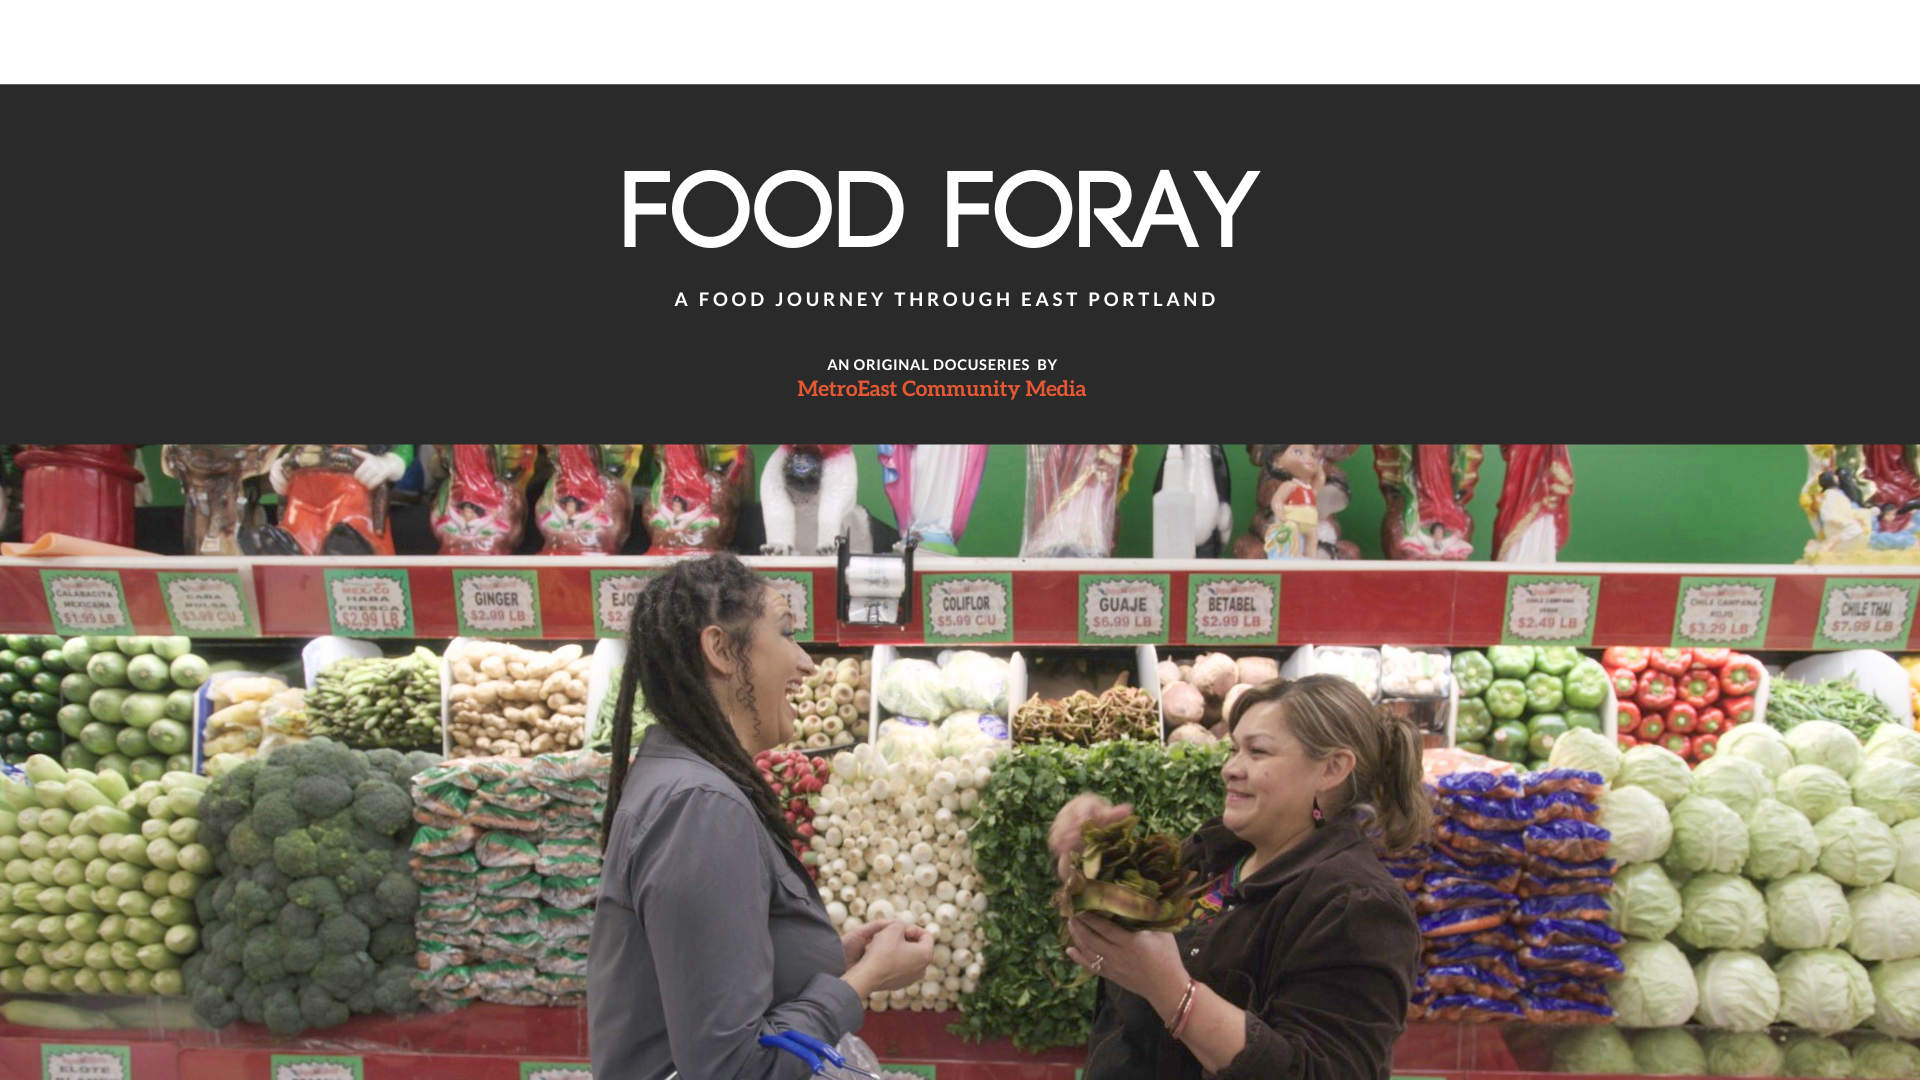 FOOD FORAY PITCH DECK